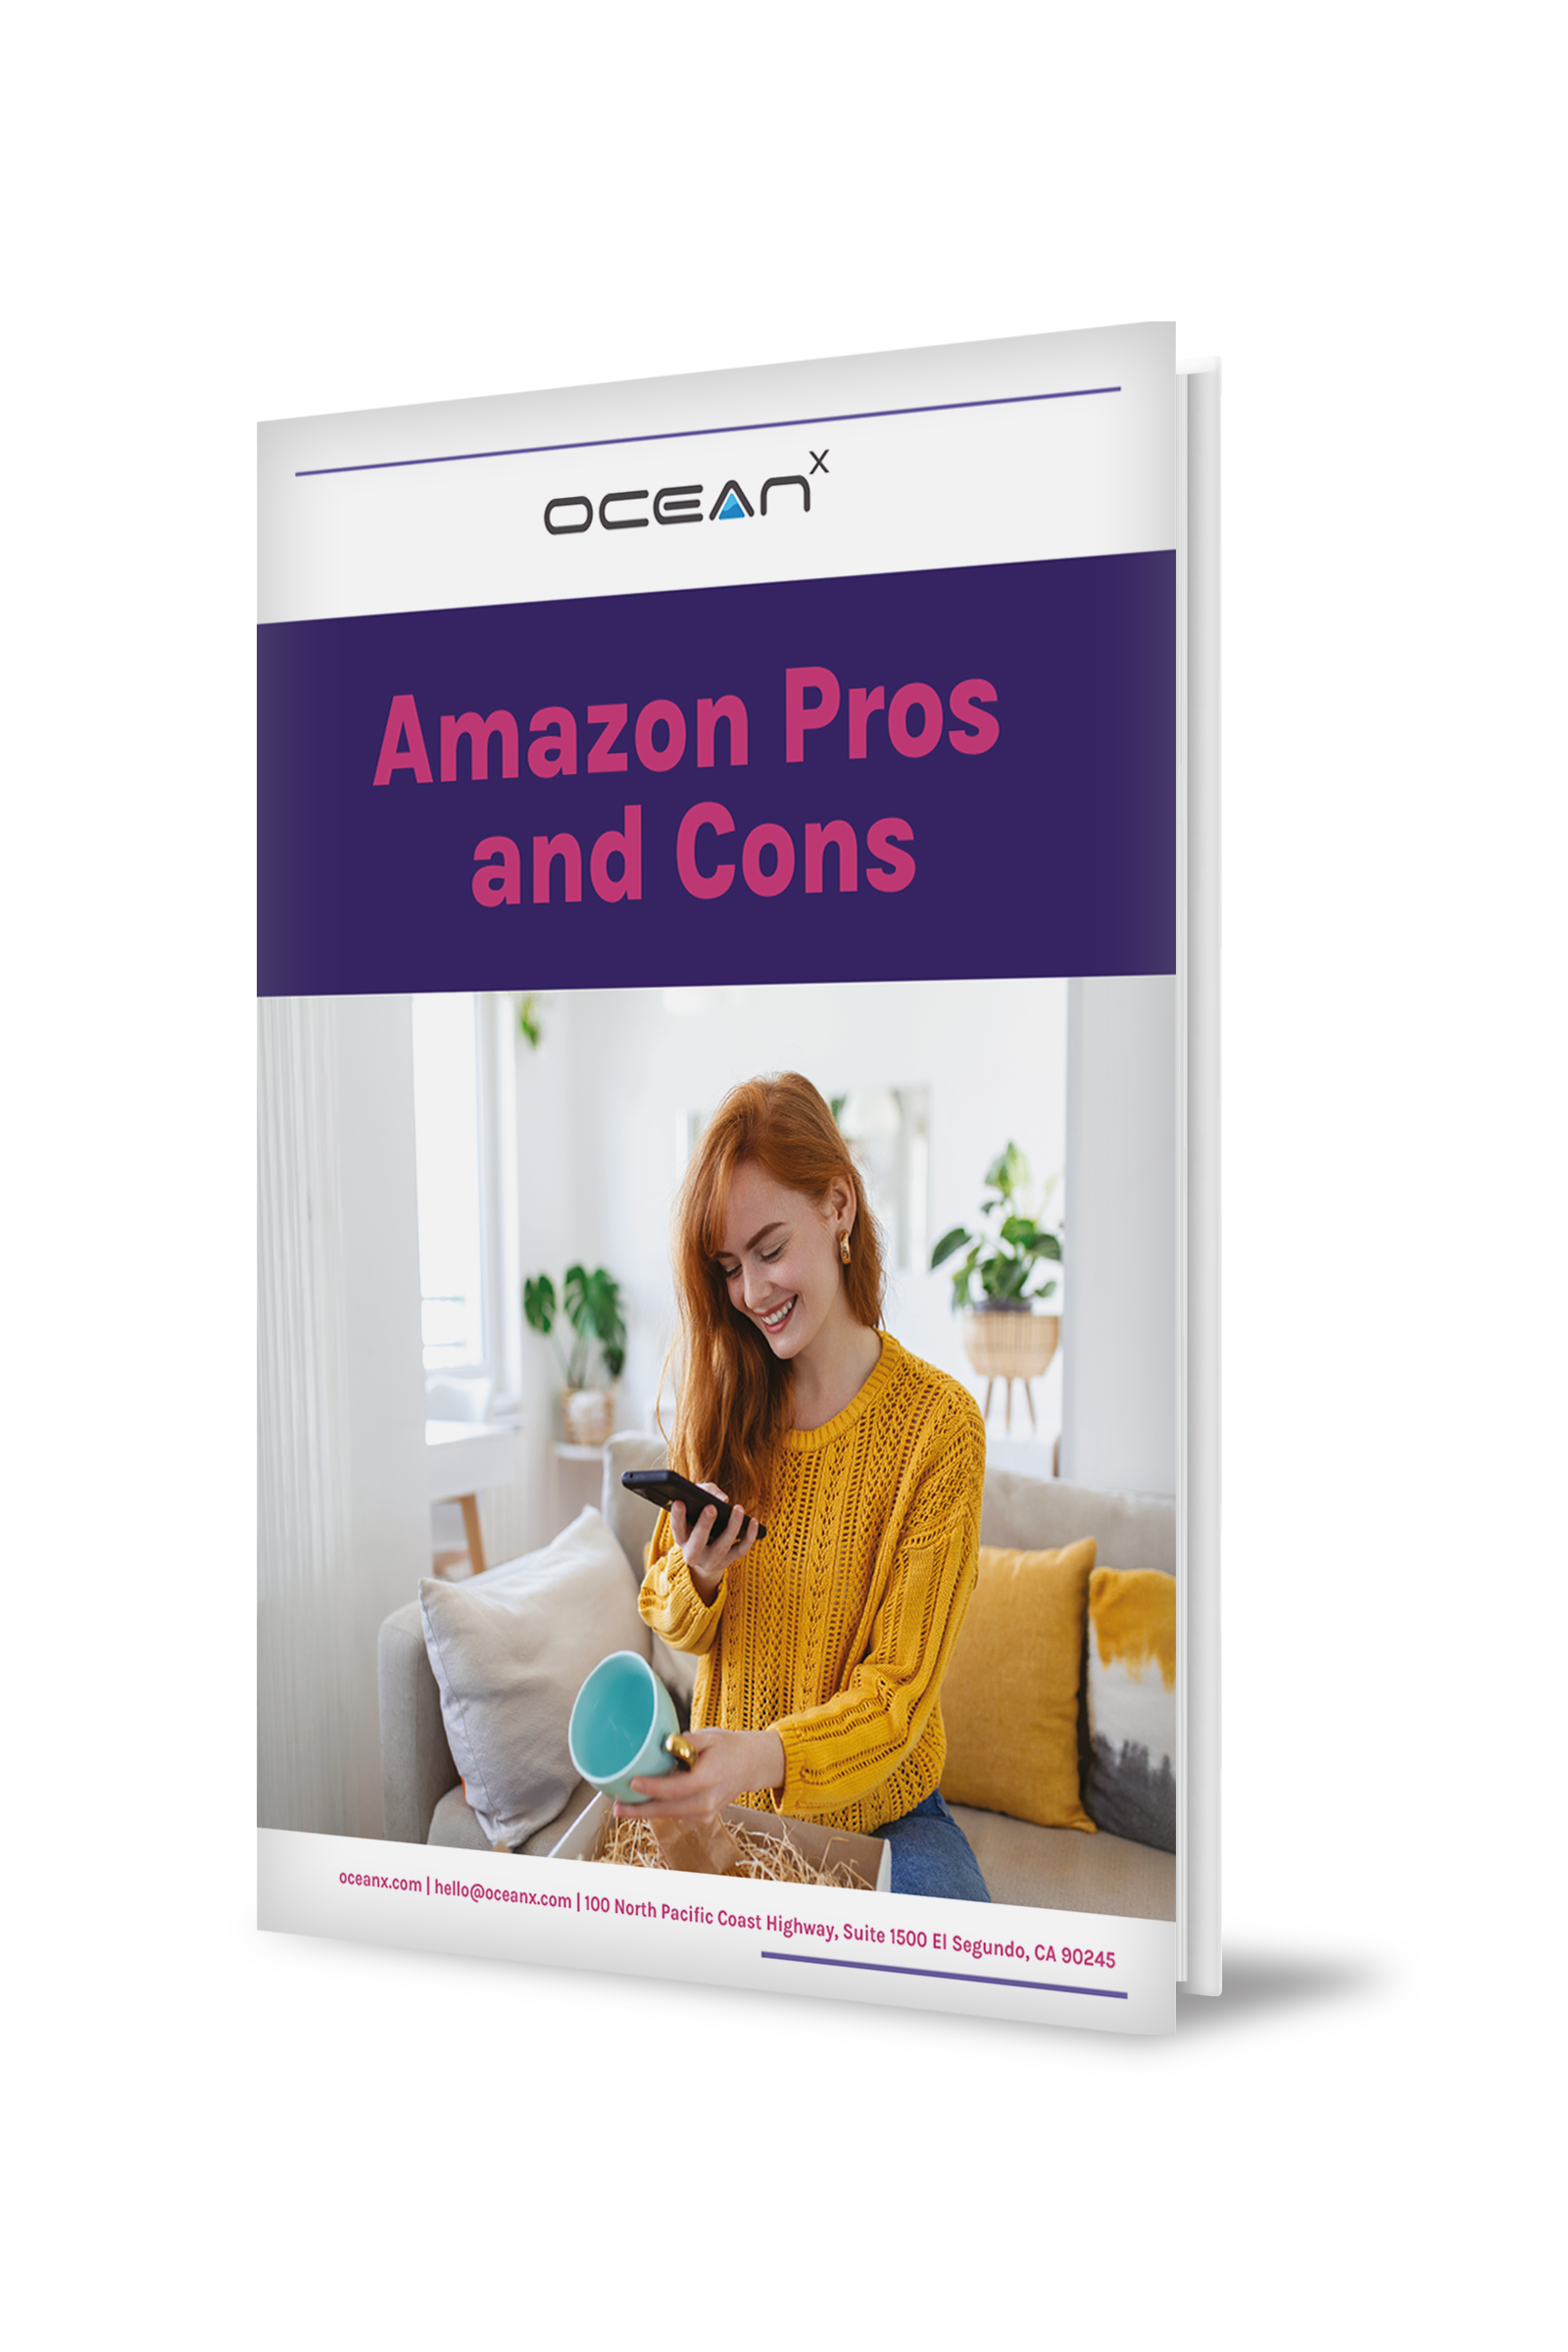 (image4) Amazon Pros and Cons